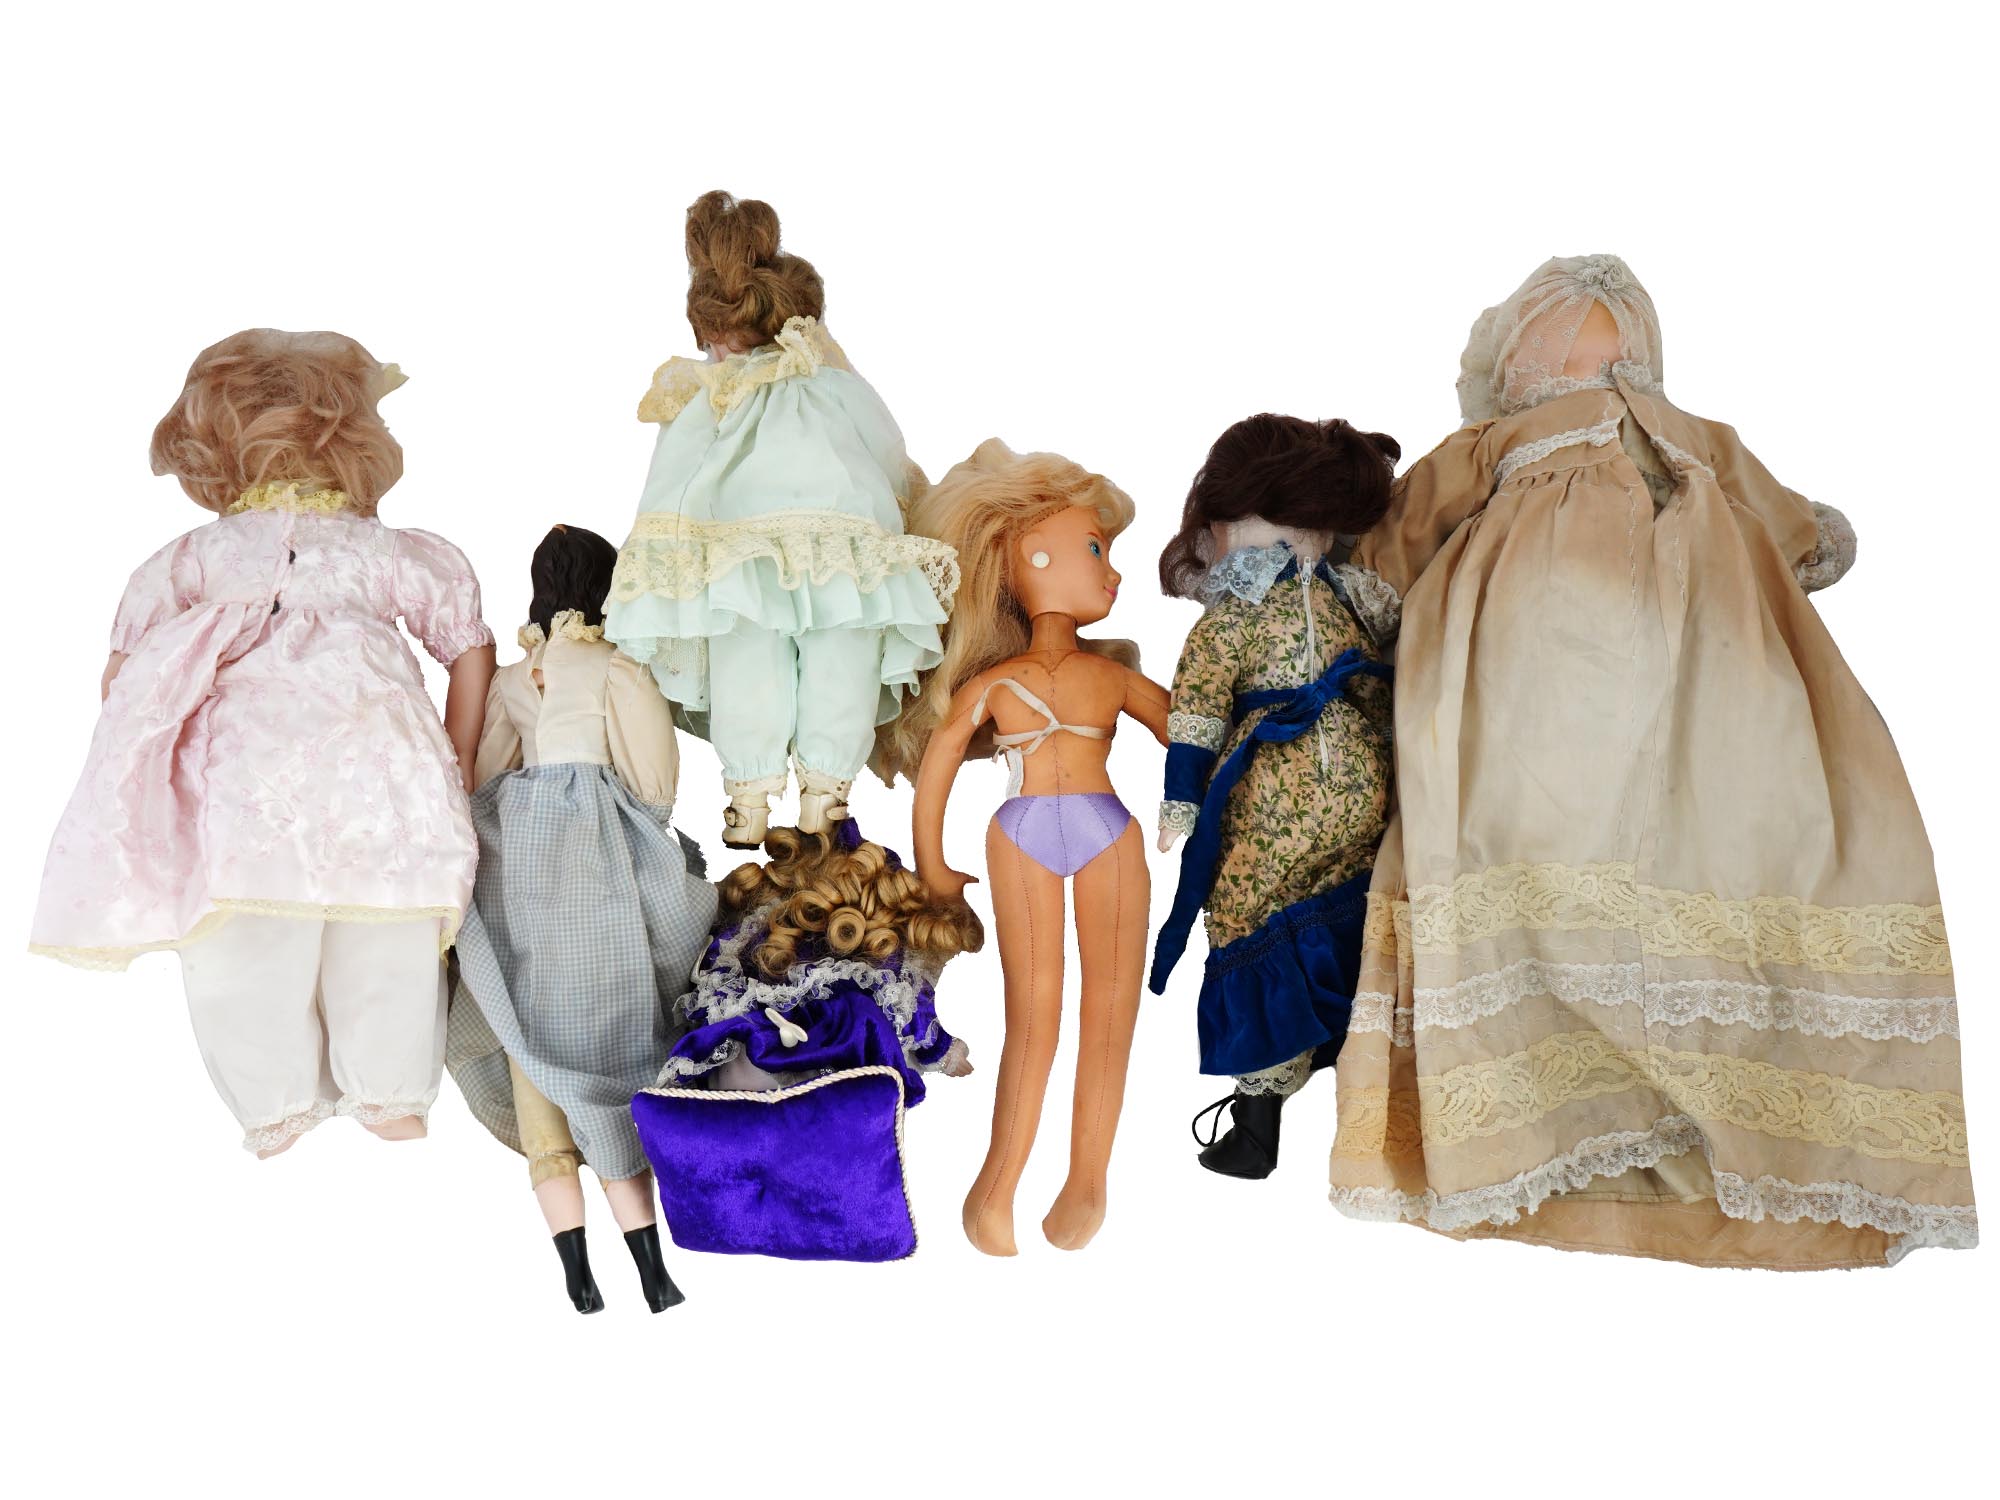 COLLECTION OF VINTAGE PORCELAIN DOLLS IN OUTFITS PIC-1